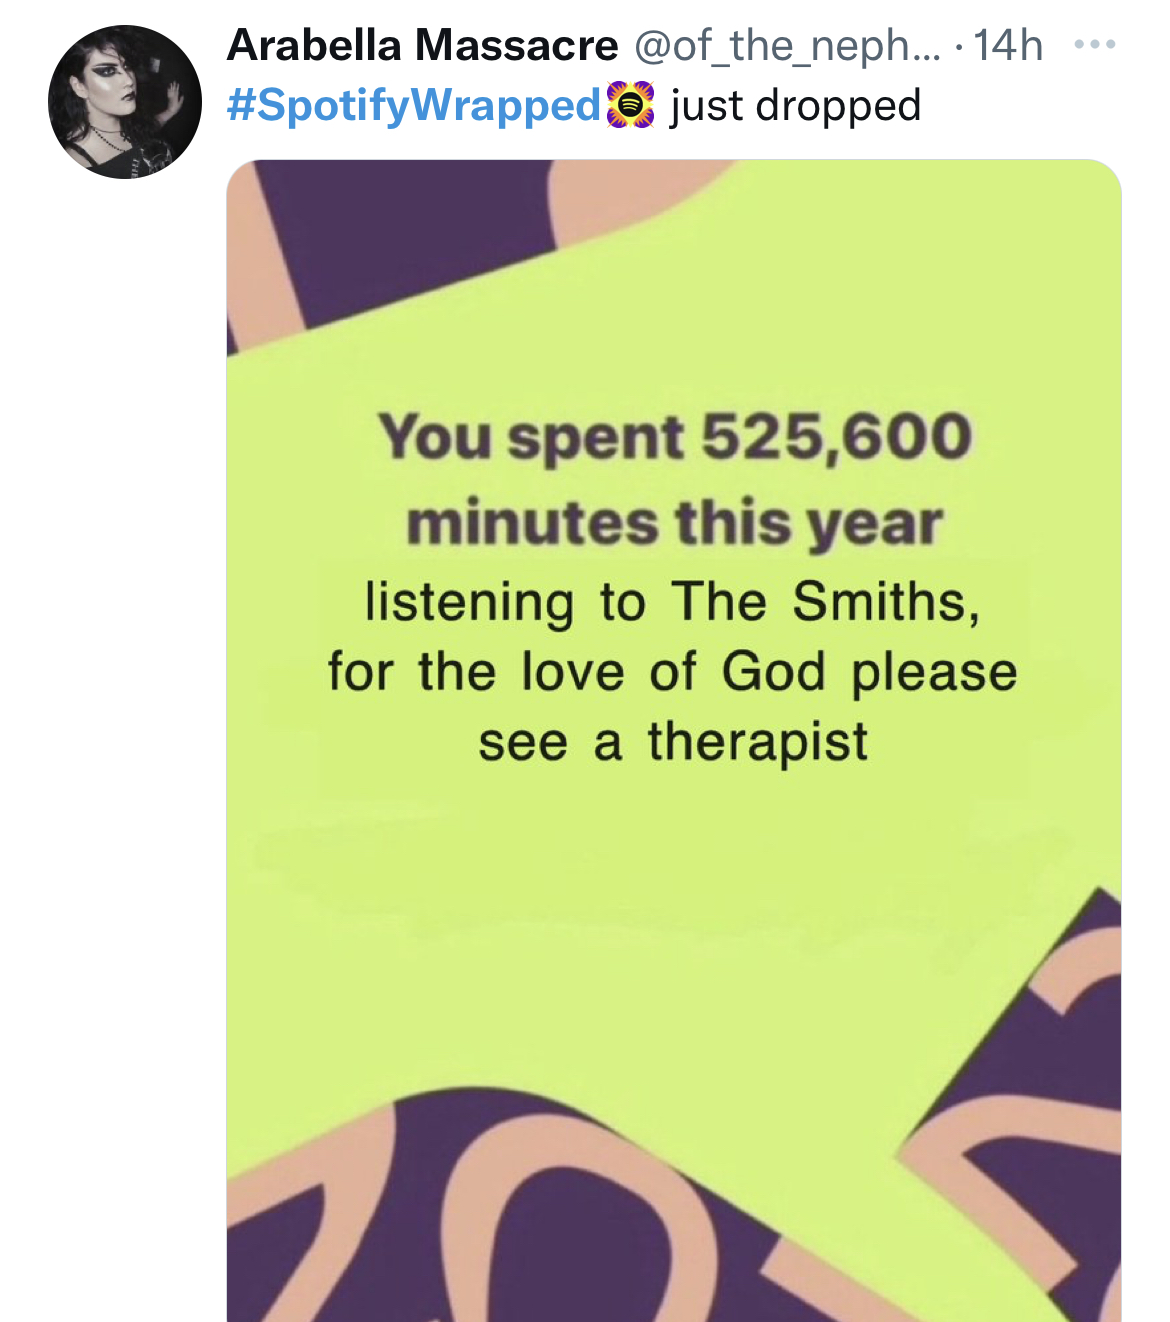 Spotify Wrapped Memes - material - Arabella Massacre ... 14h just dropped You spent 525,600 minutes this year listening to The Smiths, for the love of God please see a therapist C